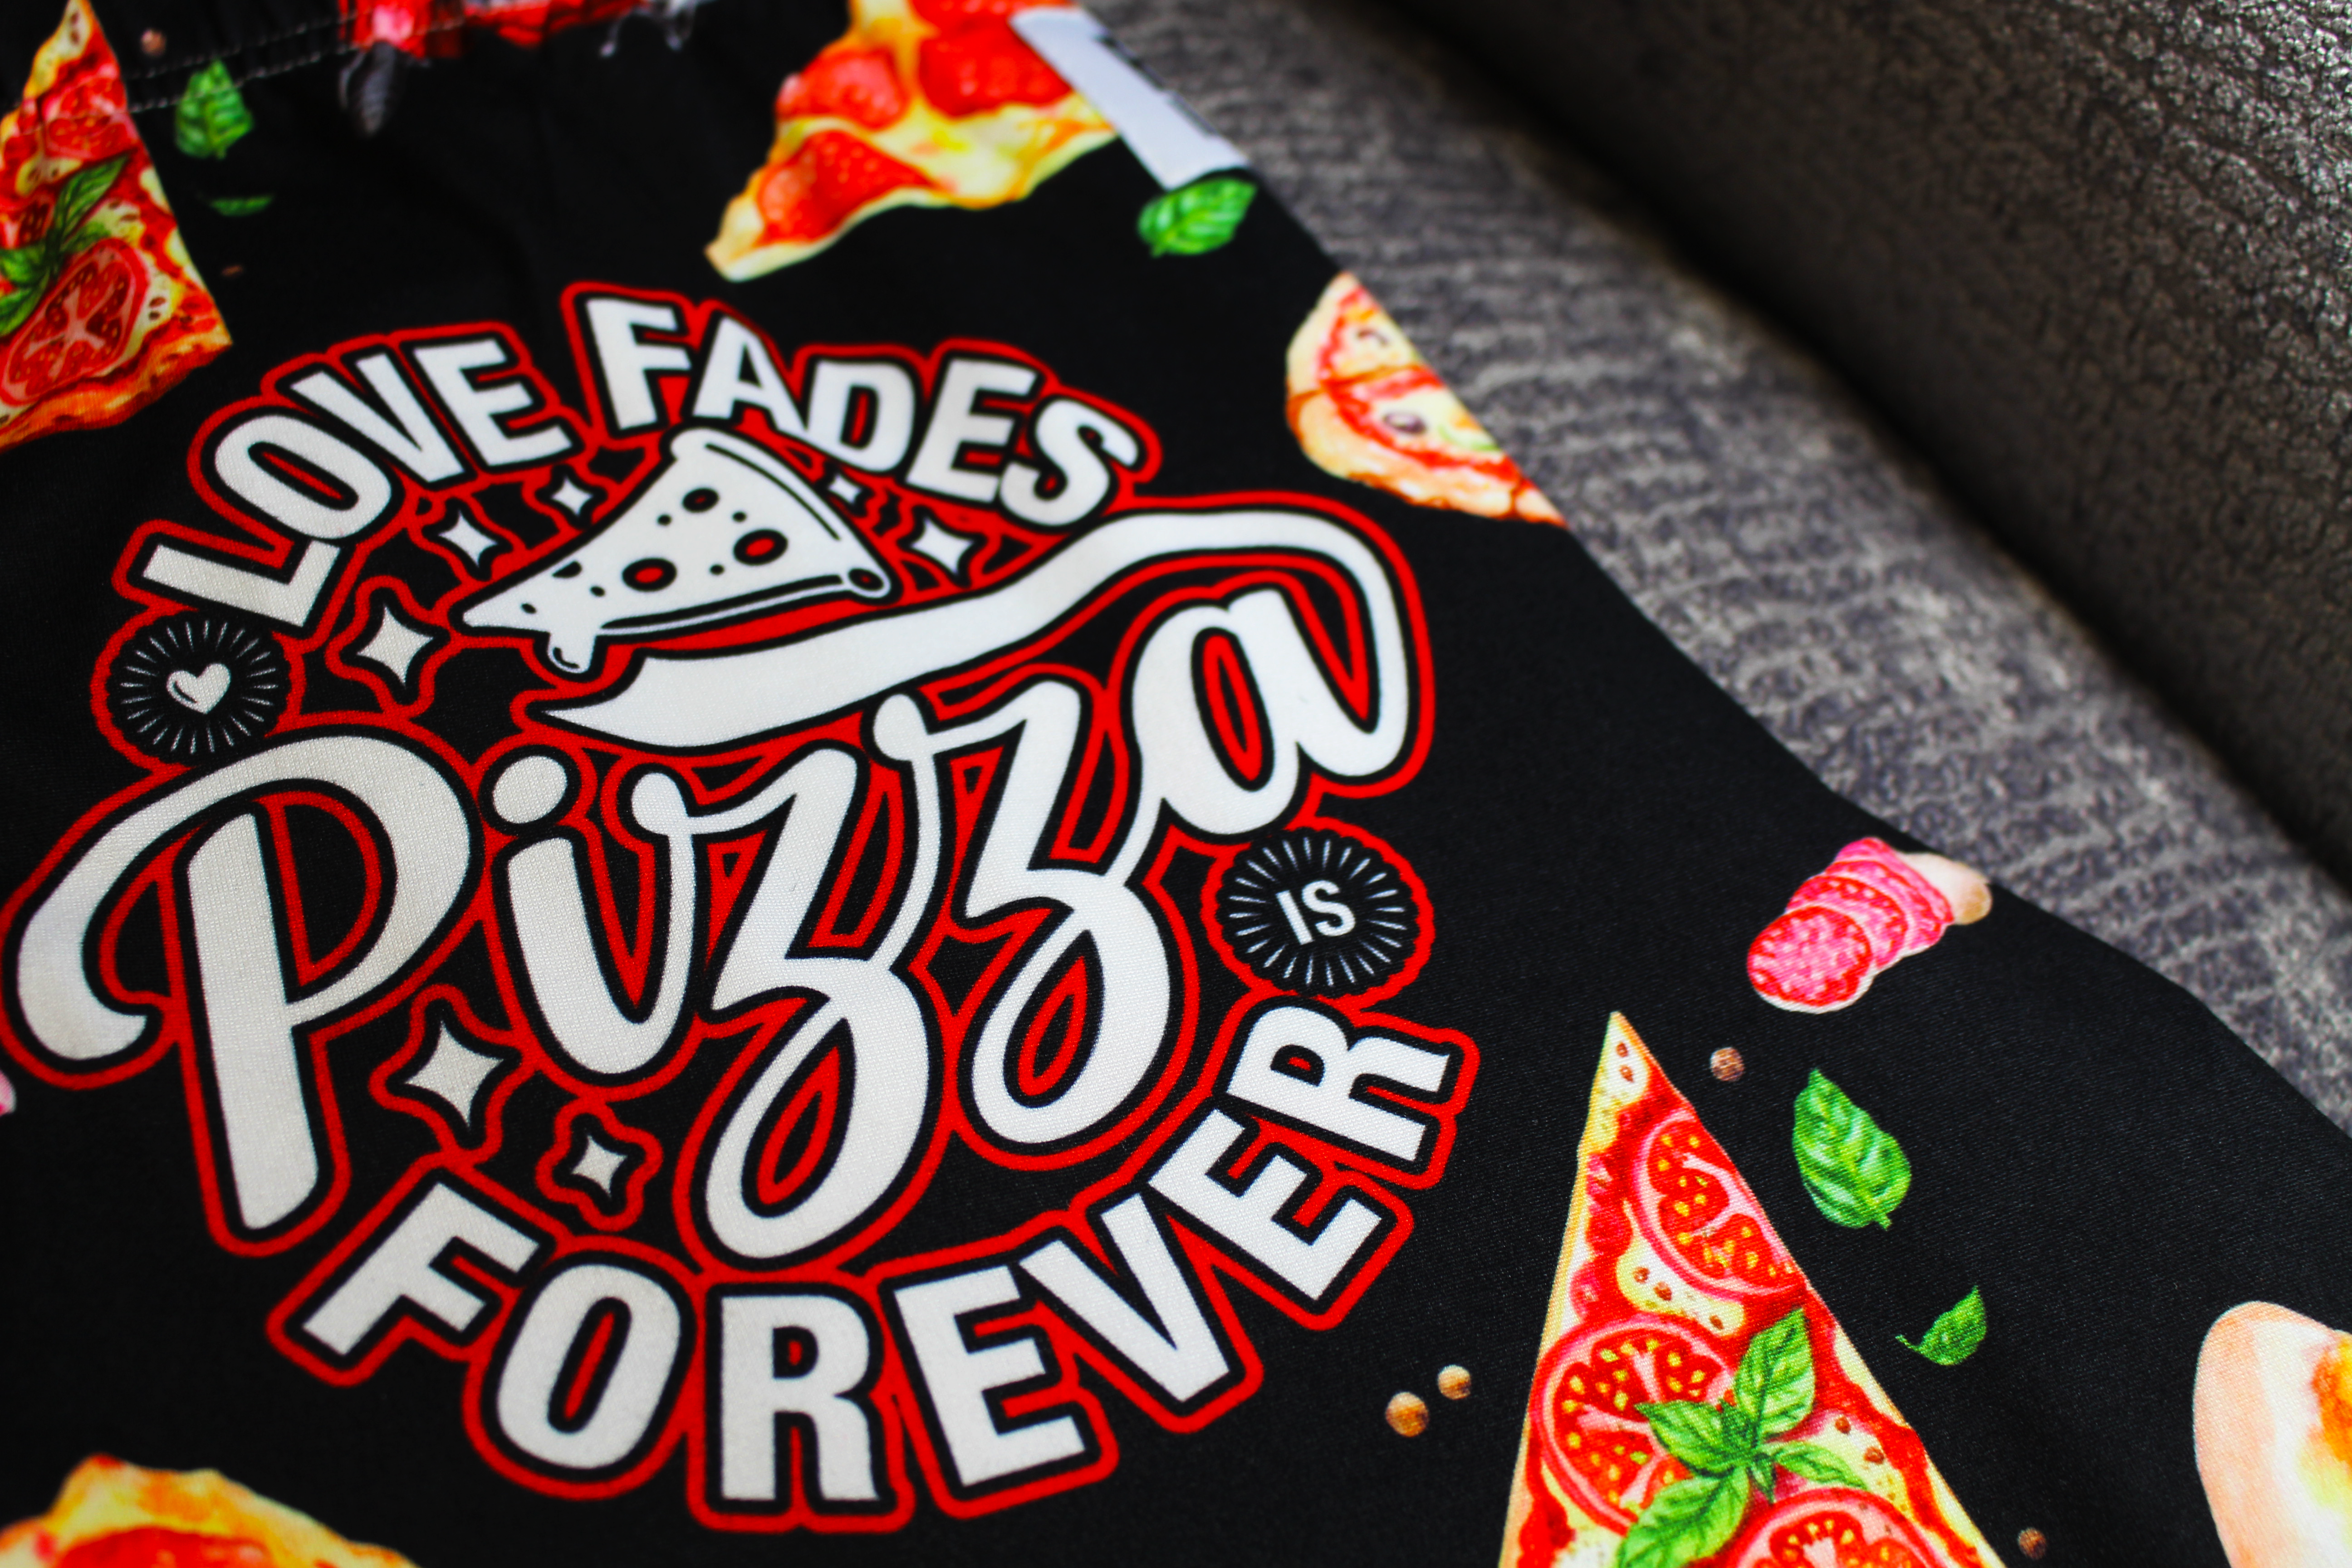 Pizza Is Forever pajama lounge pants laid out on gray chair close up image of text